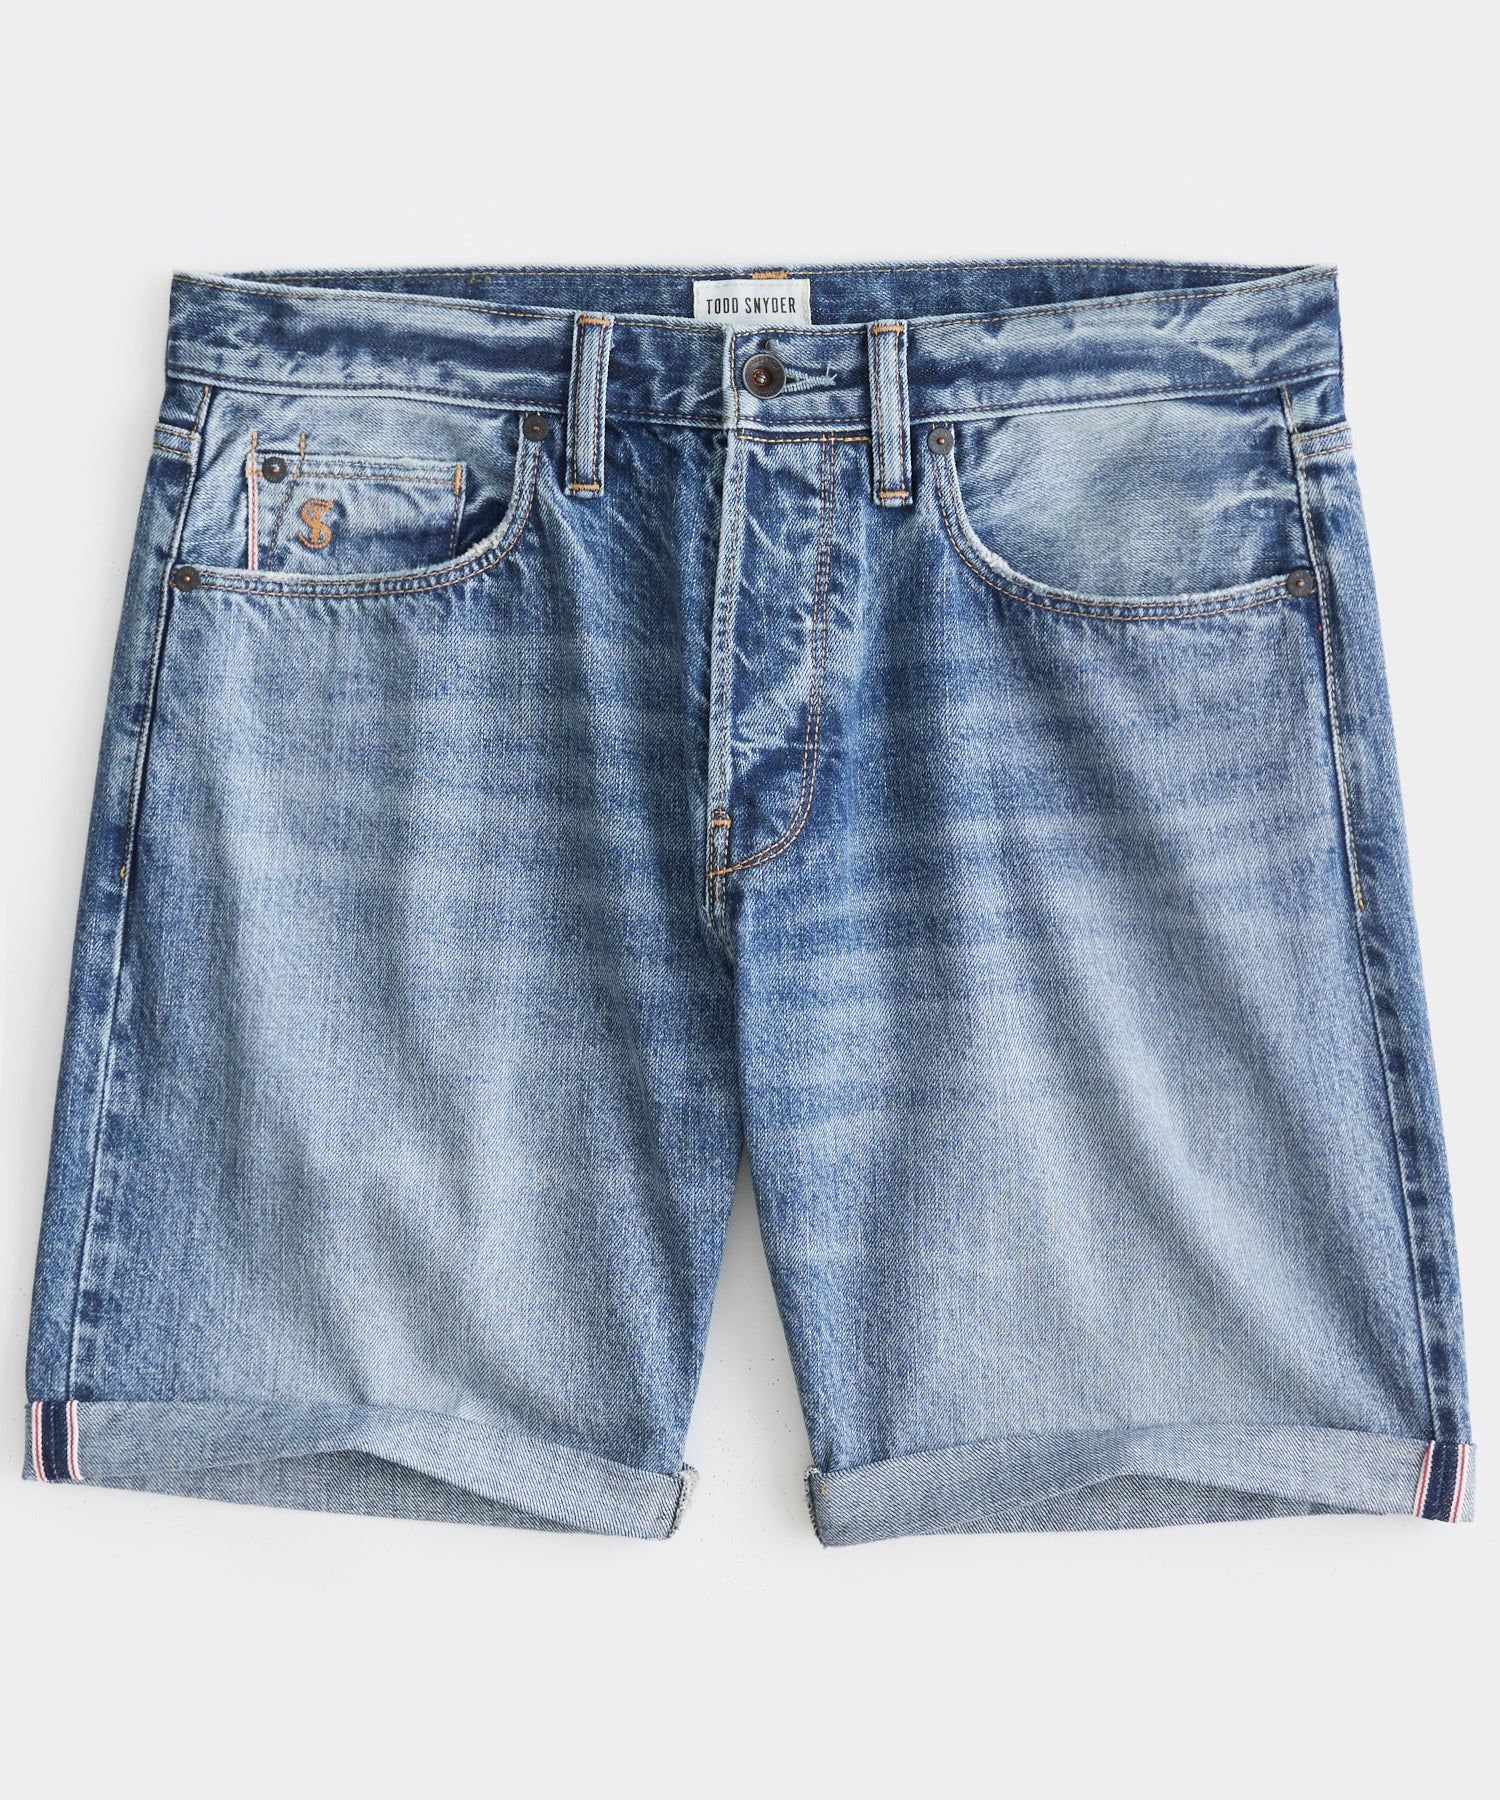 Washed Men's Denim Shorts at Rs 375 in Ahmedabad | ID: 2849901209555